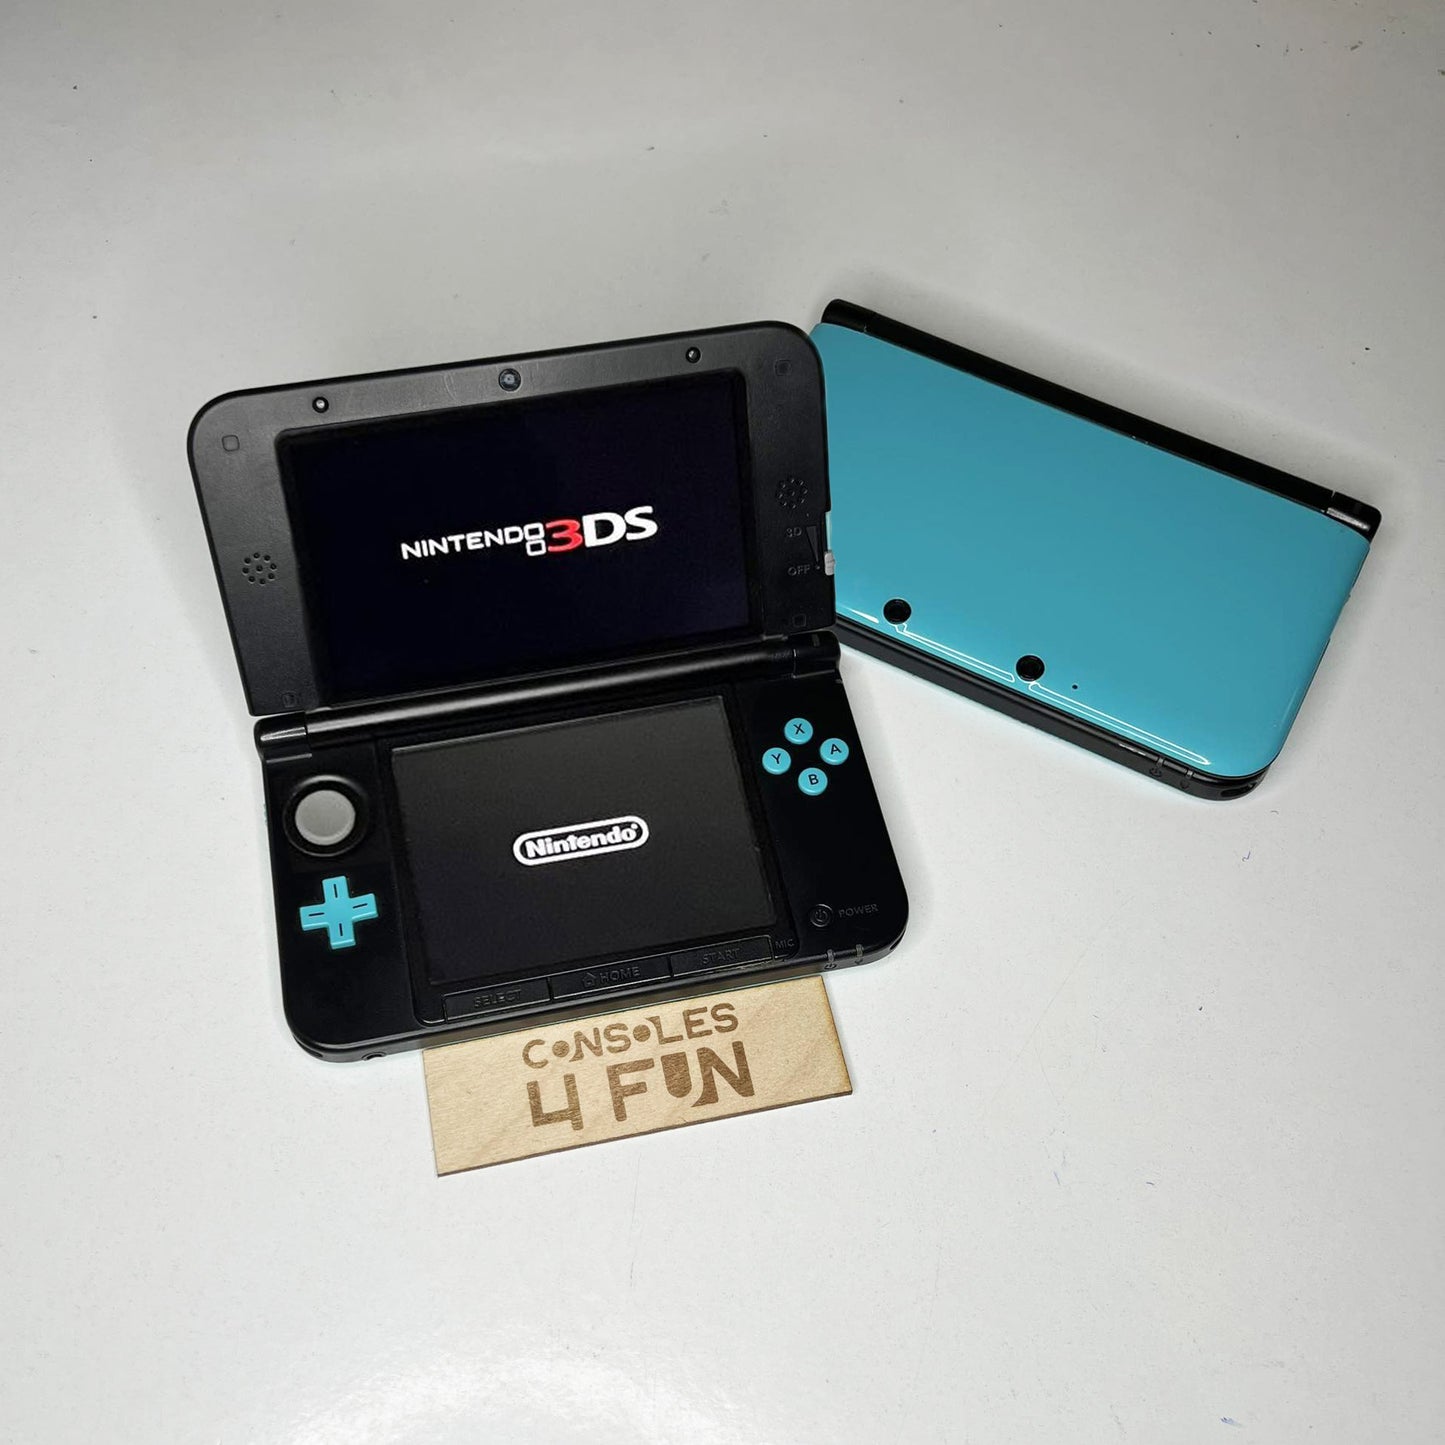 Nintendo 3DS XL with Games